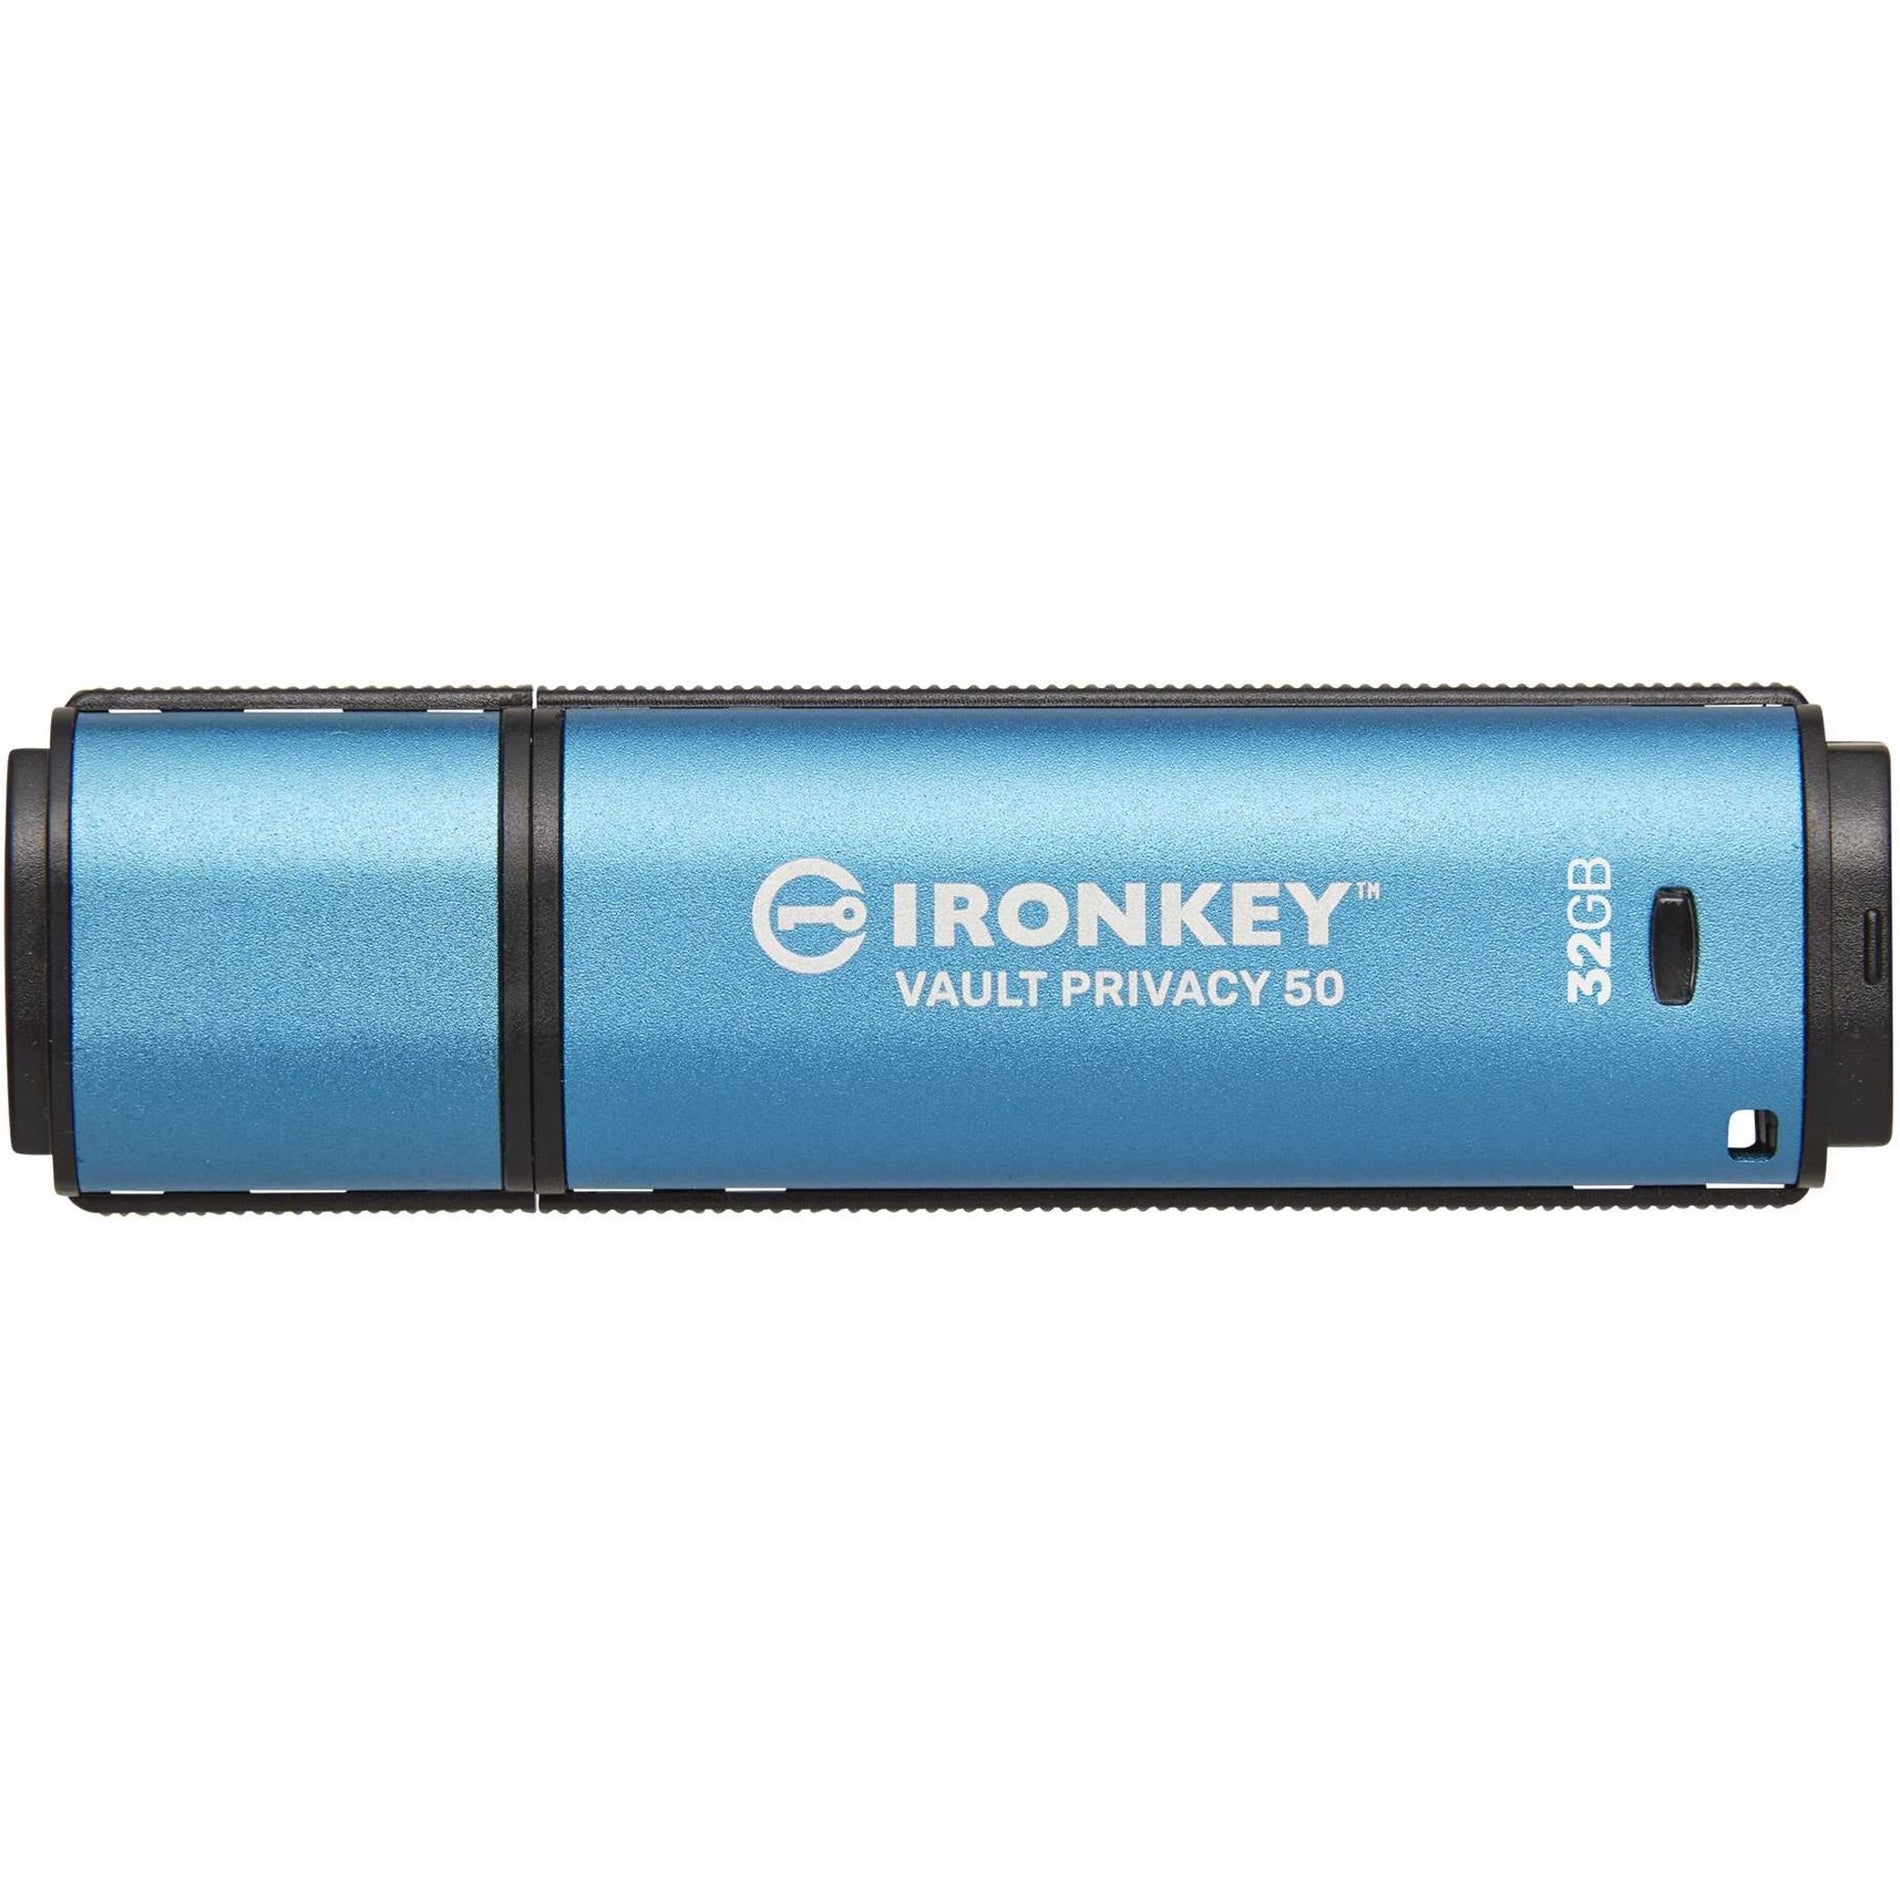 IronKey IKVP50/32GB Vault Privacy 50 Series 32GB USB 3.2 (Gen 1) Type A Flash Drive, Password Protection, 256-bit AES Encryption